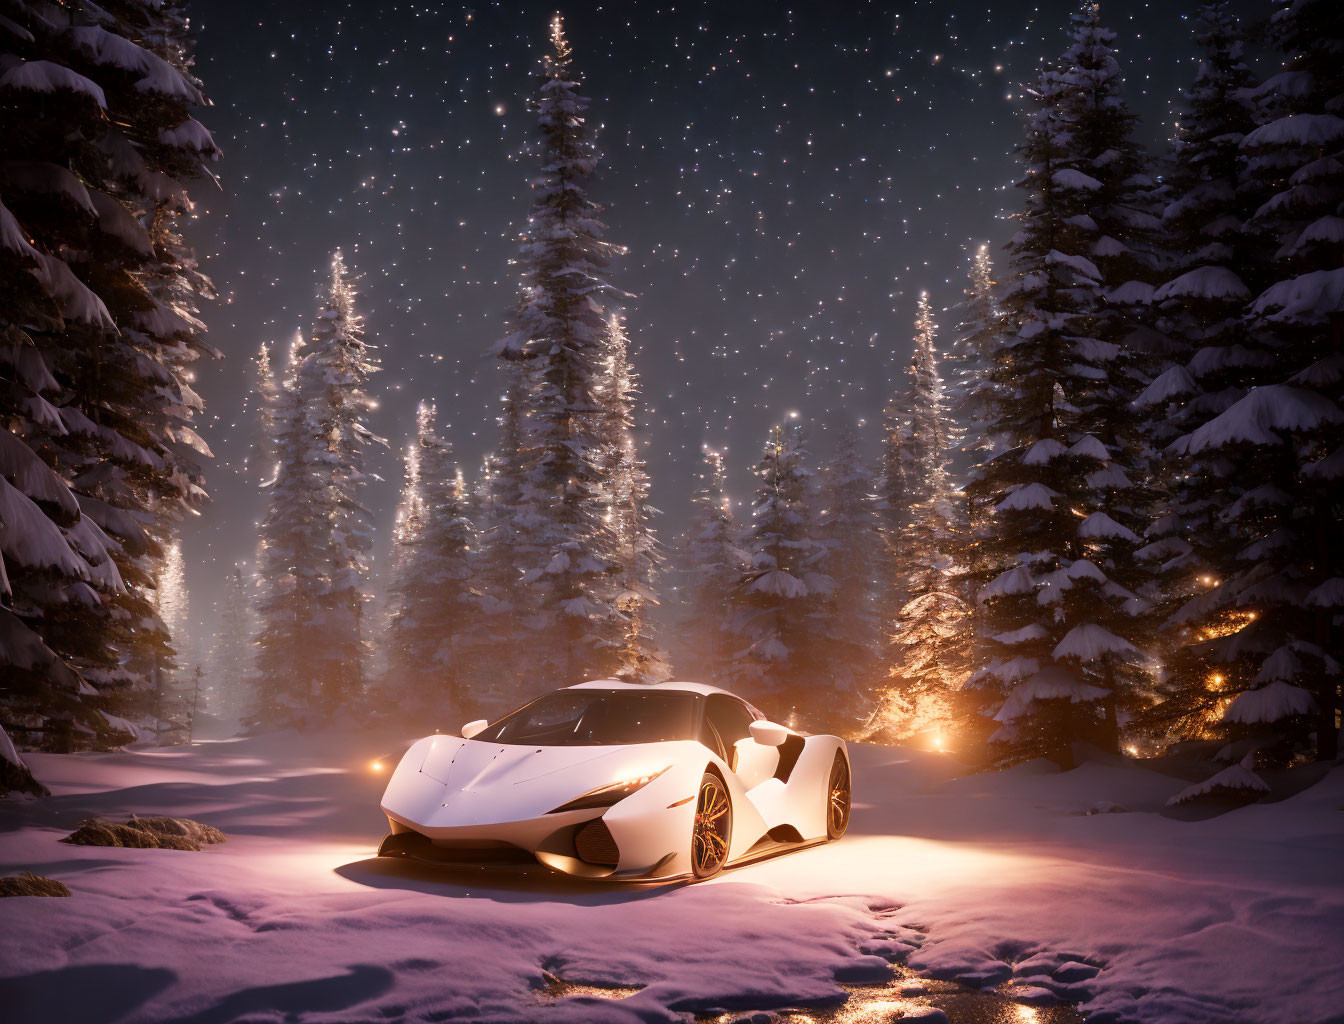 White sports car in snowy forest at twilight with illuminated trees and twinkling stars